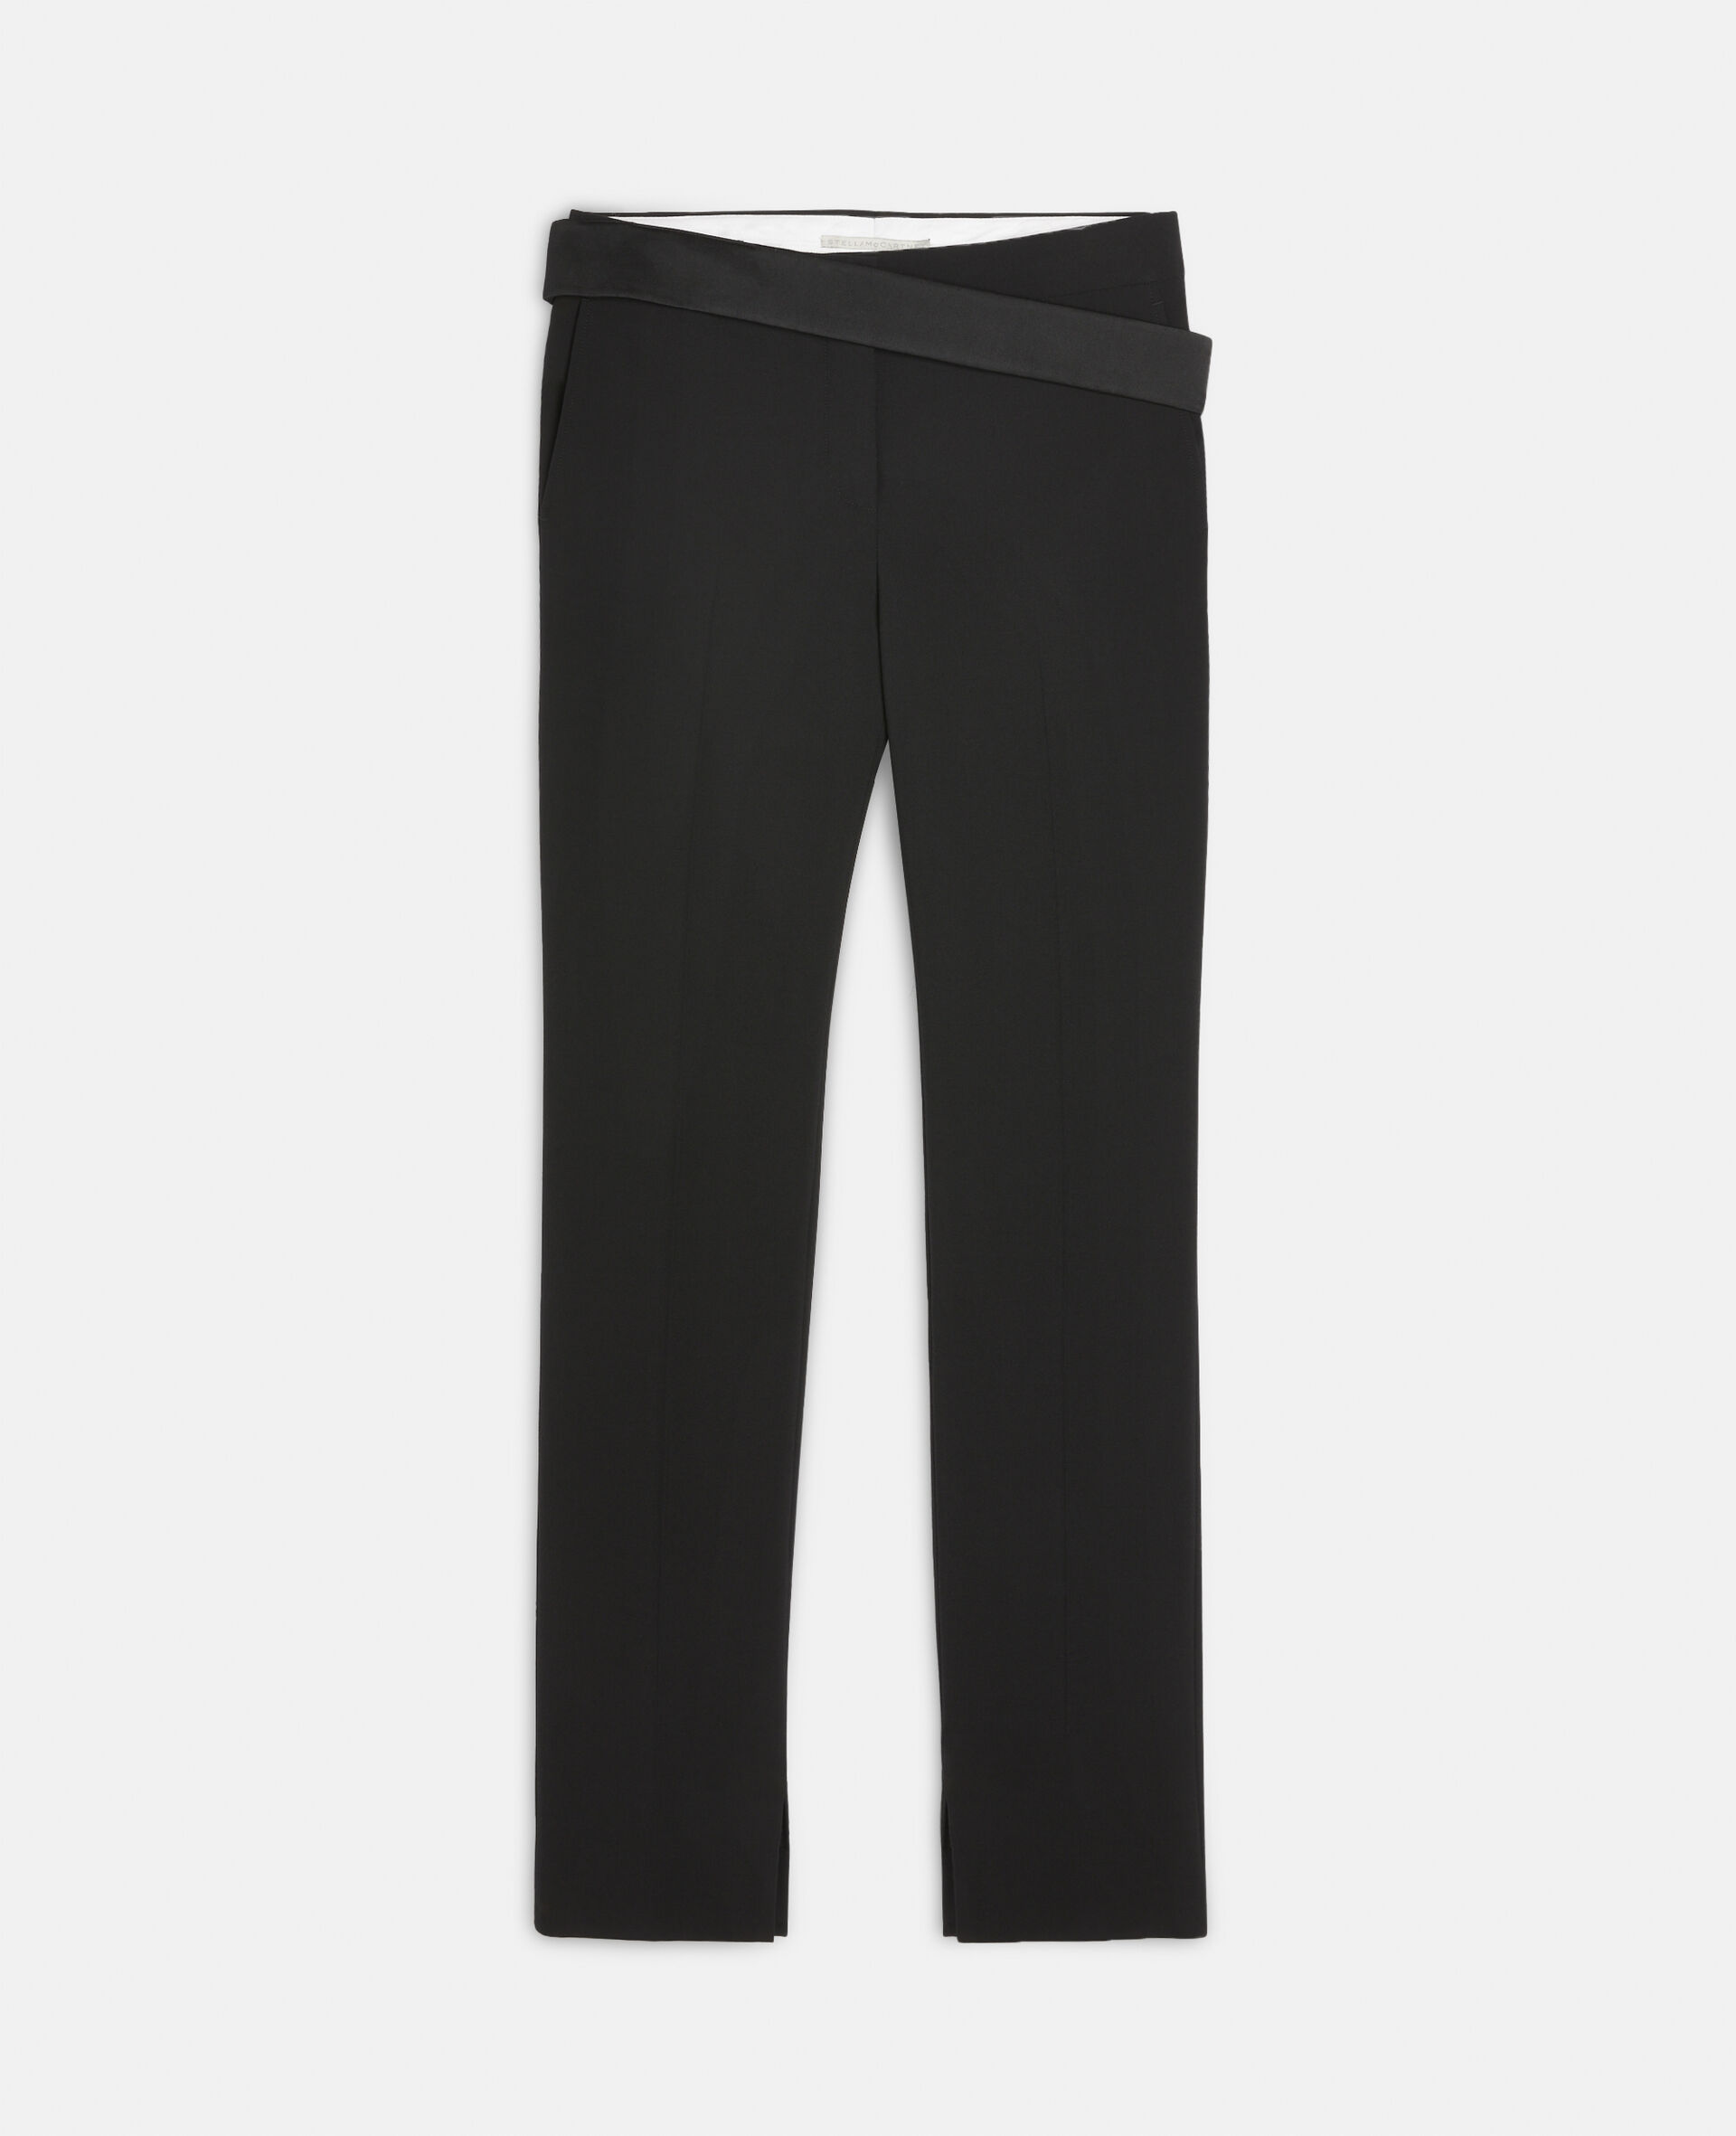 Twill Tailored Dinner Trousers-Black-large image number 0